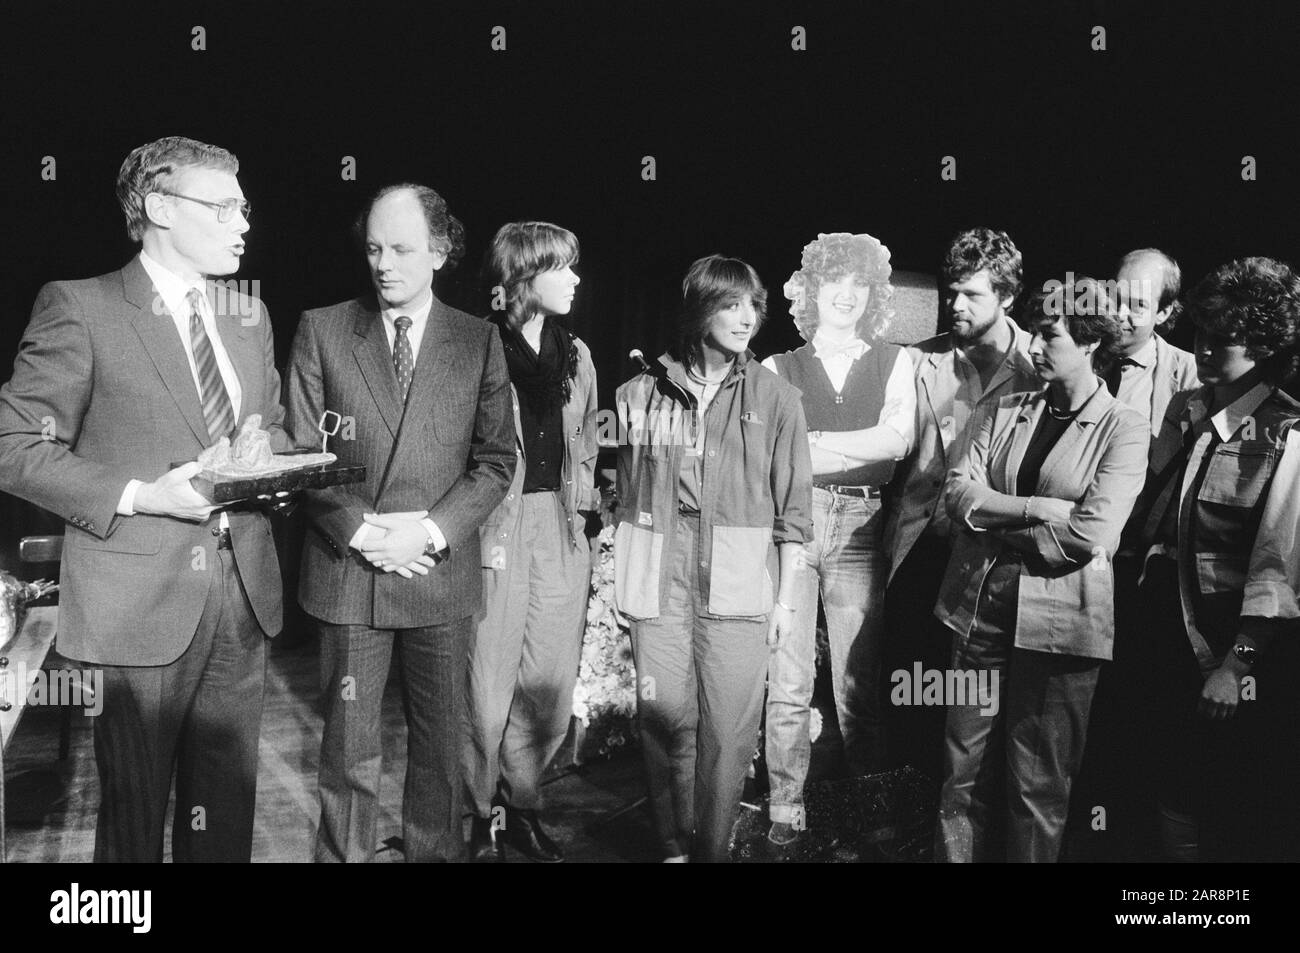 Gift of The Children's Cabinet for the best TV shows for youth  Team of the Youth Journaal (Leoni Jansen is assembled), left of her Marga of Prague Date: May 25, 1983 Keywords: children's program s, news broadcasts, awards, programmers, television programs Personal name: Jansen, Leoni, Prague, Marga of Stock Photo